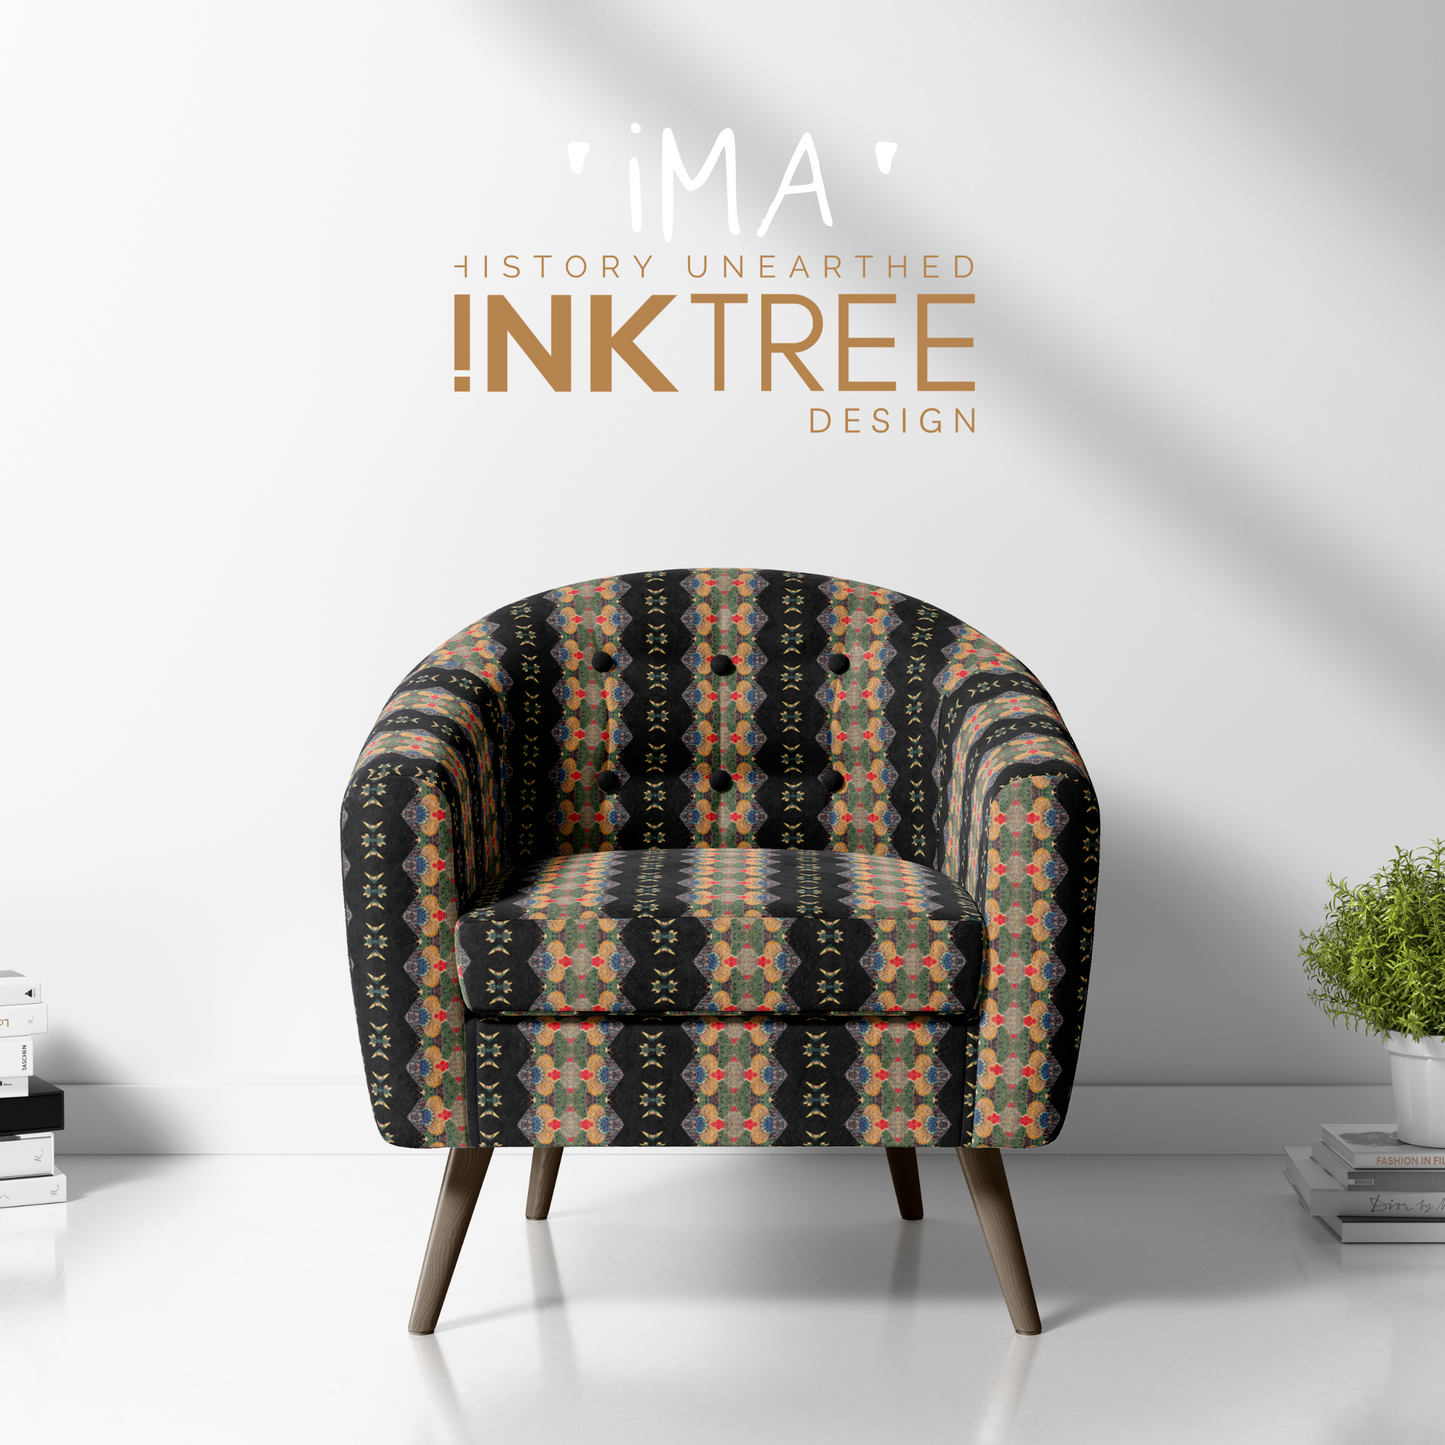 A club chair with a gold, black, blue, red, green and white oriental looking pattern on it with a white wall background and books and pot plant on the floor.  There is a ima history unearthered ink tree design logo on 